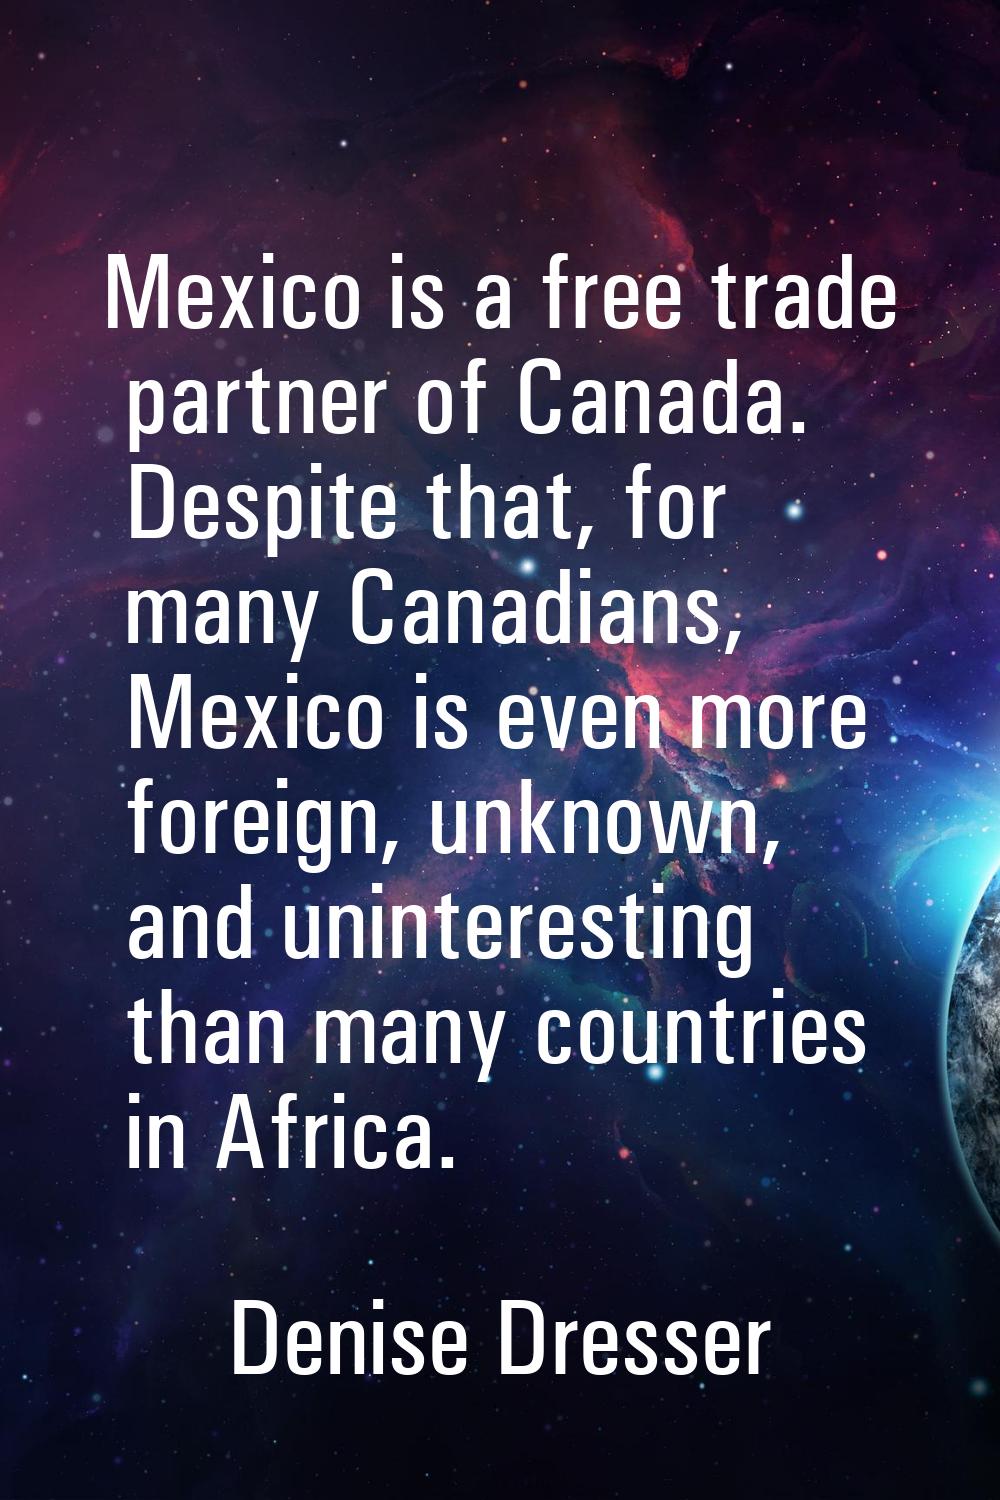 Mexico is a free trade partner of Canada. Despite that, for many Canadians, Mexico is even more for